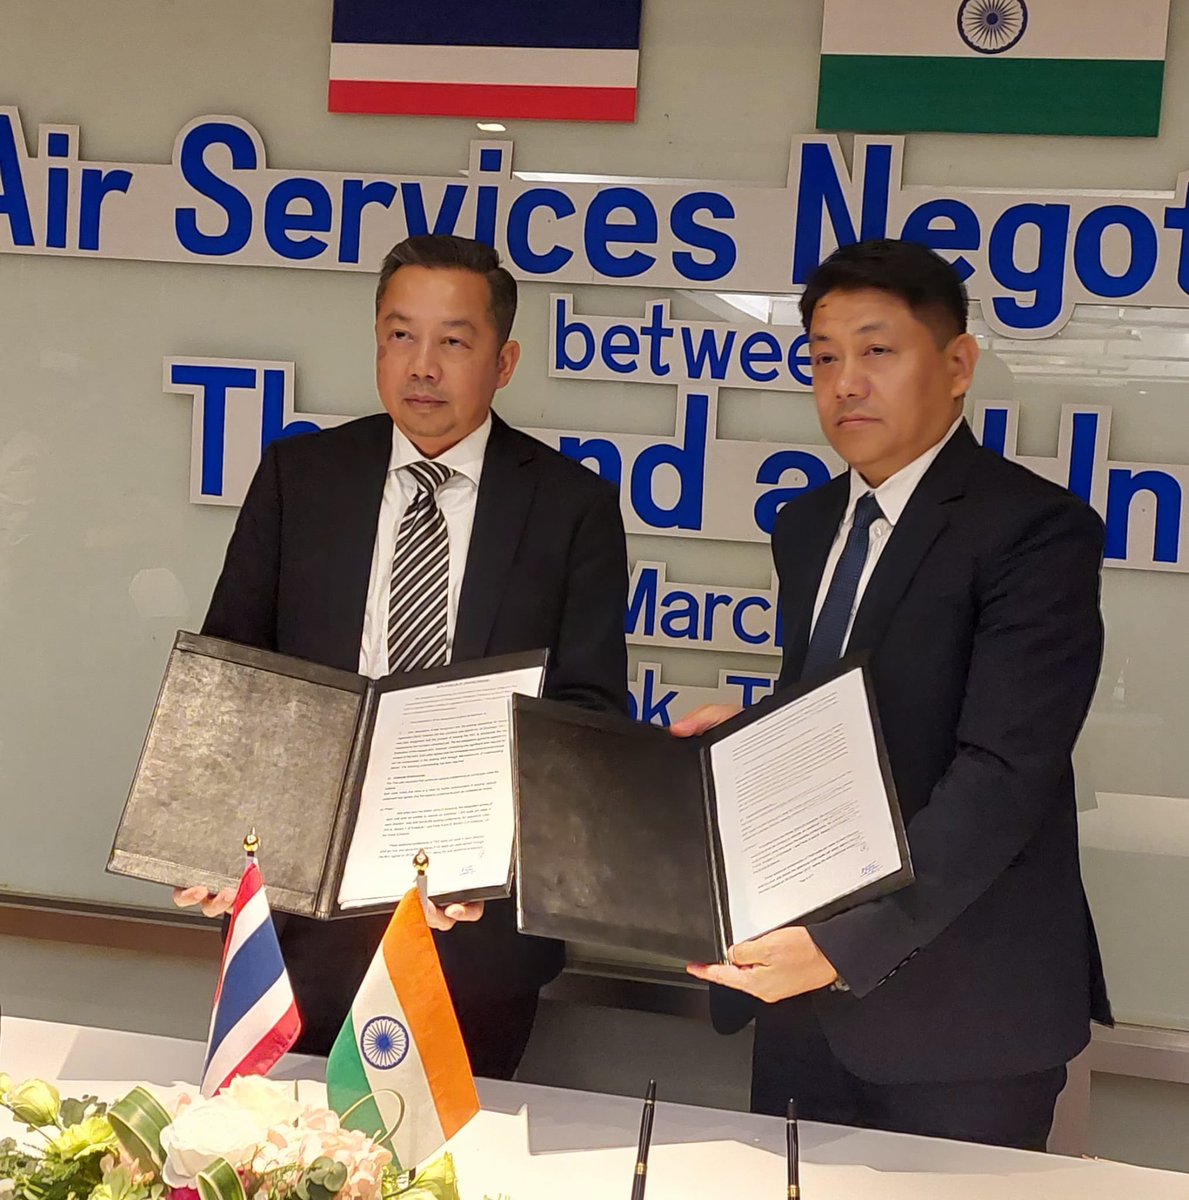 🇮🇳India and Thailand signed an MoU to expand flight services between both countries. 🇹🇭Both countries will add more weekly seats in two stages. In each stage, 7000 seats will be added. 🇮🇳Thailand has agreed to open 4 new points of call for Indian carriers: Chiang Rai, Hat Yai,…